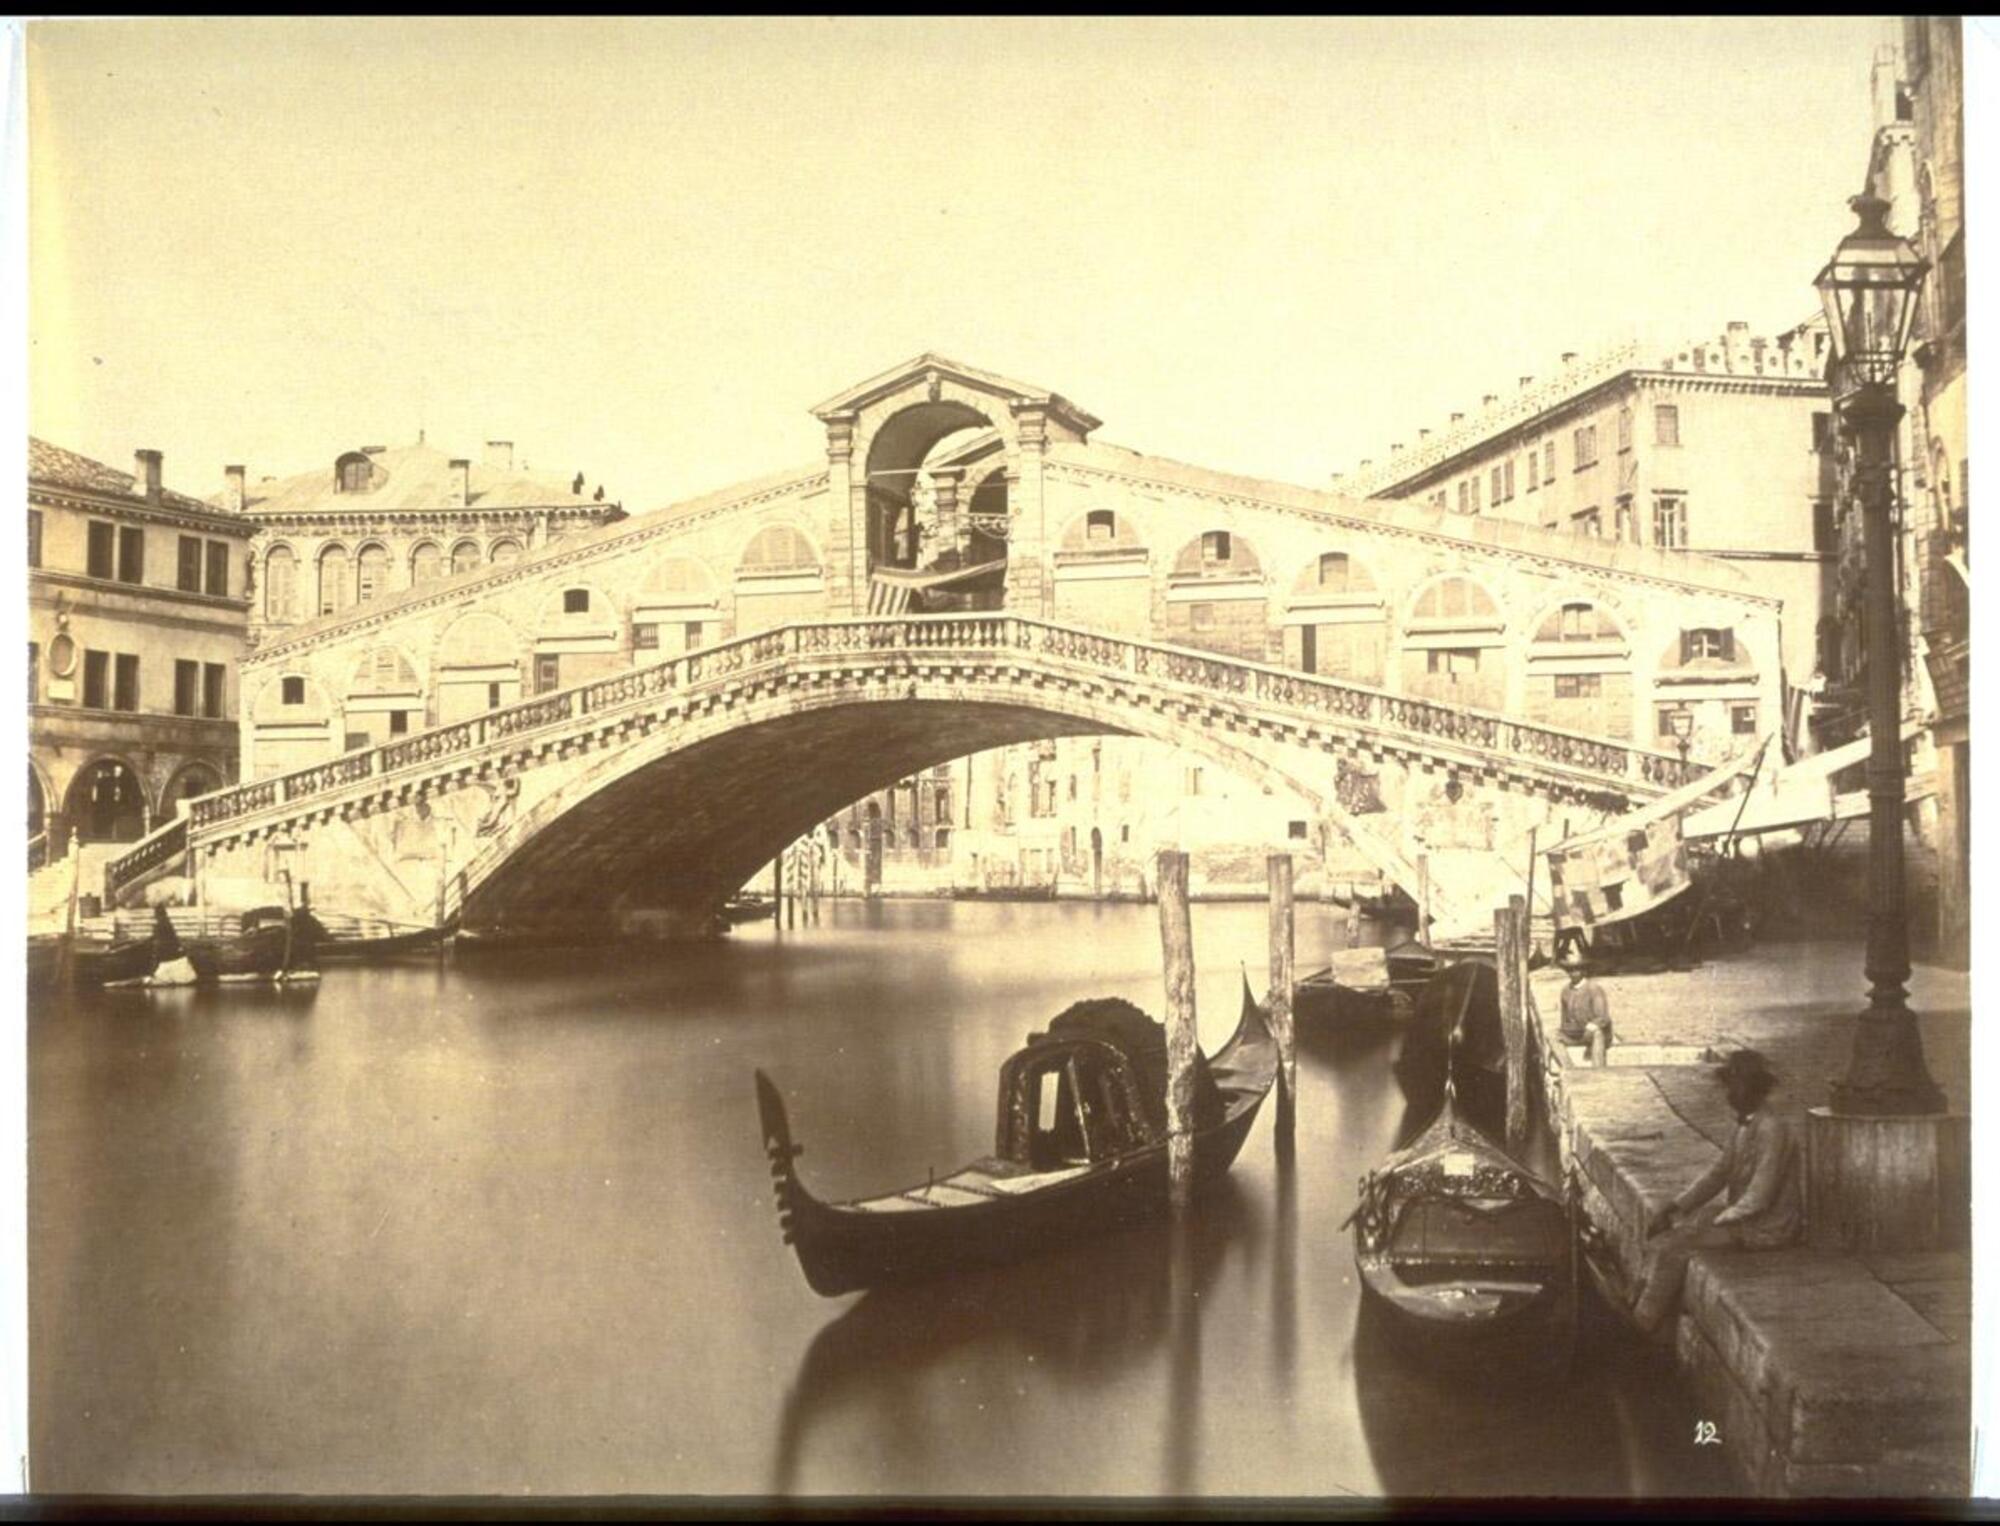 This photograph depicts a view of a marble covered bridge spanning the width of a city canal.  Along the embankments are a series of gondolas and a few seated men.